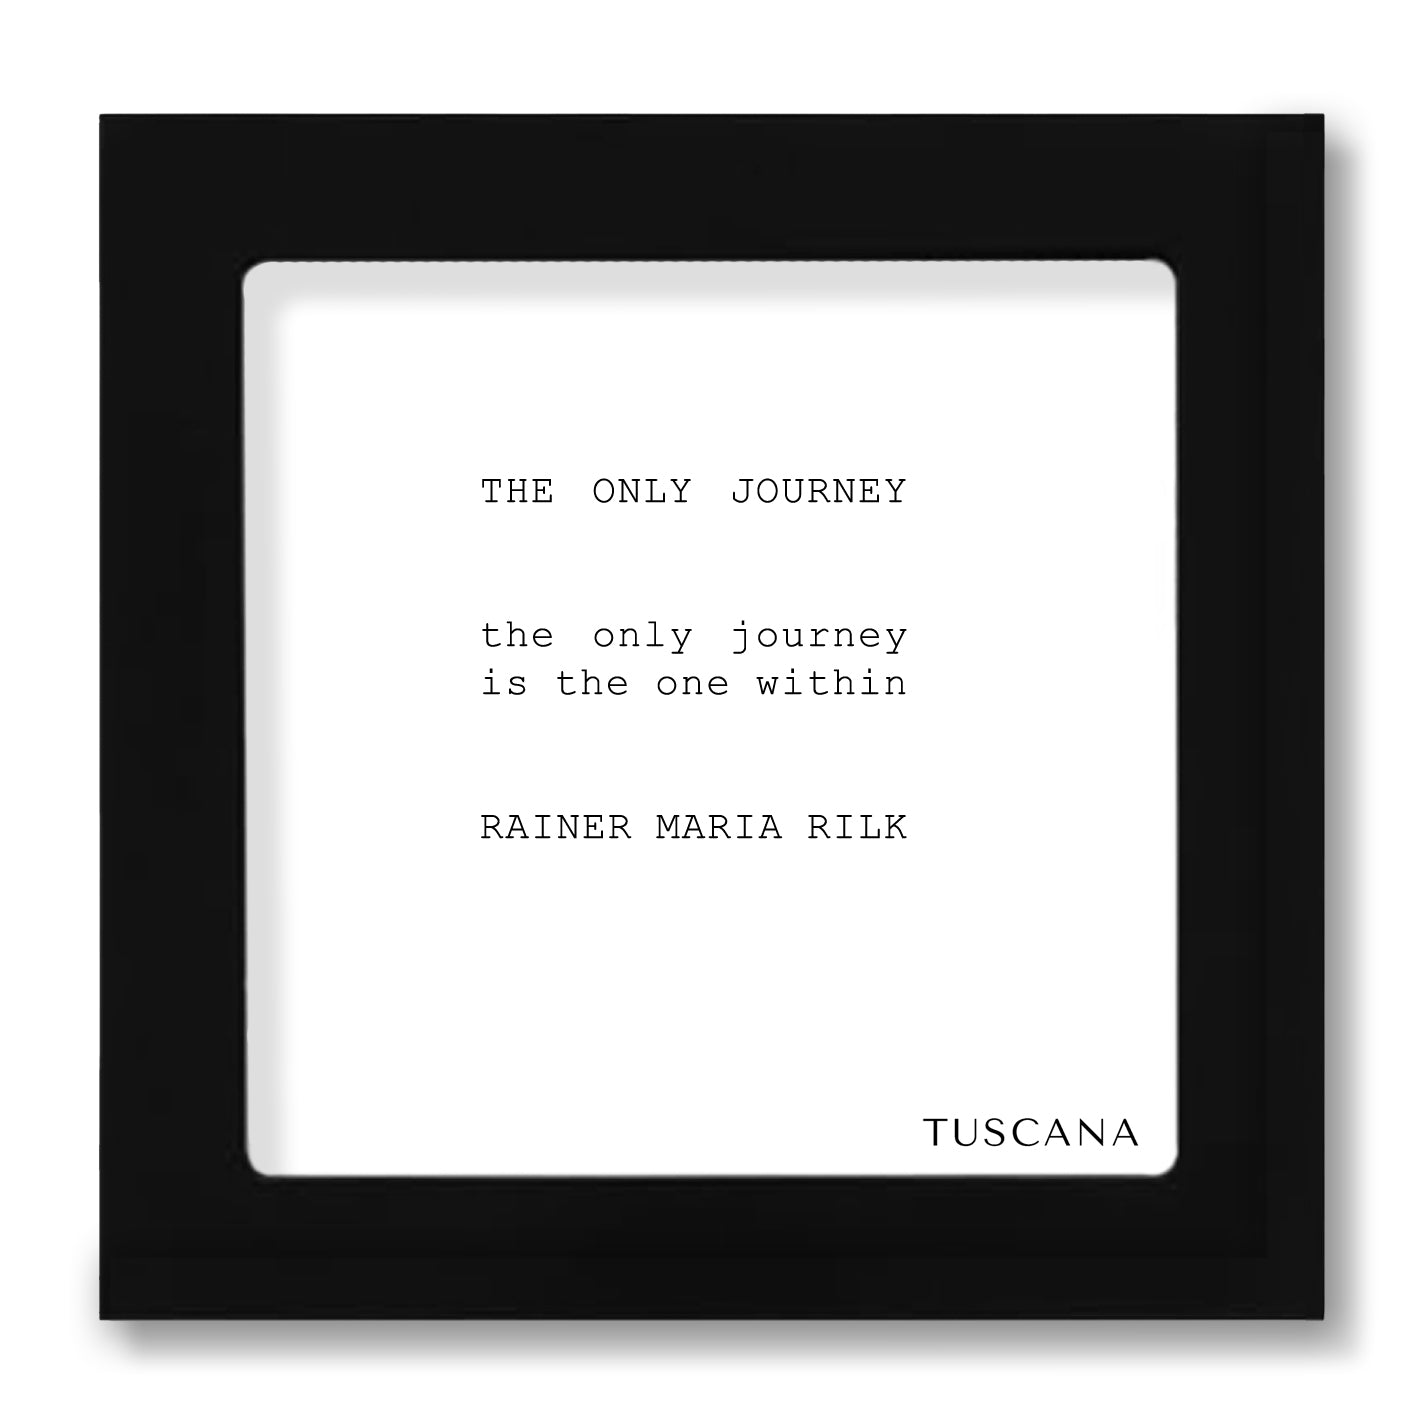 "THE ONLY JOURNEY" BY RAINER MARIA WILK